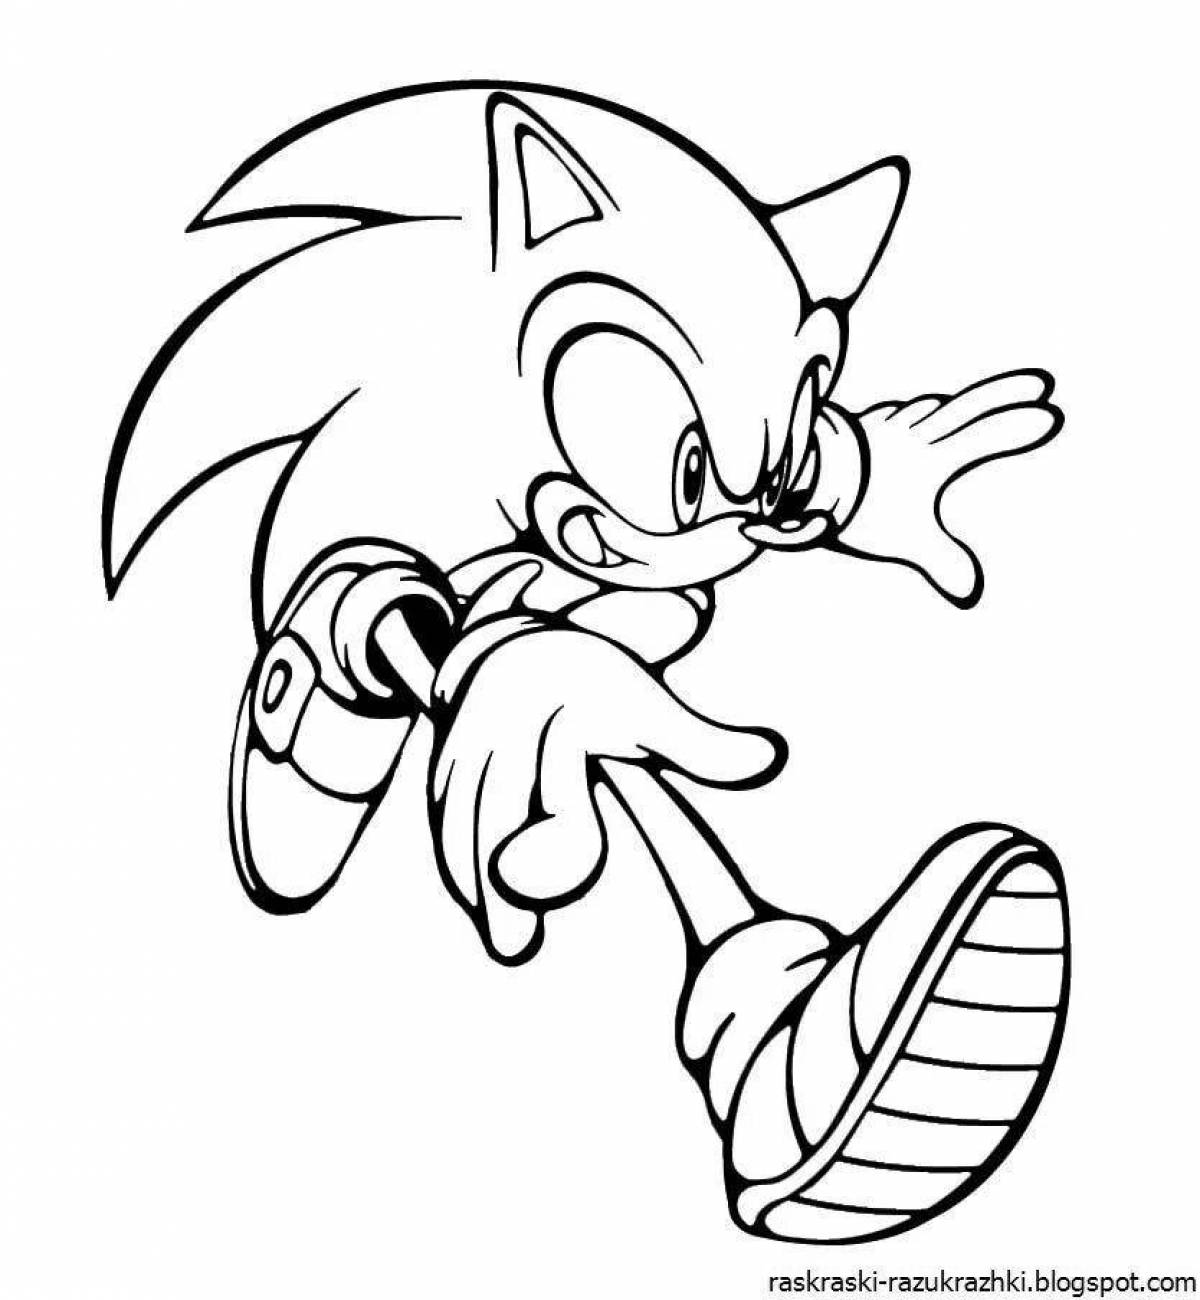 Bright white sonic coloring page